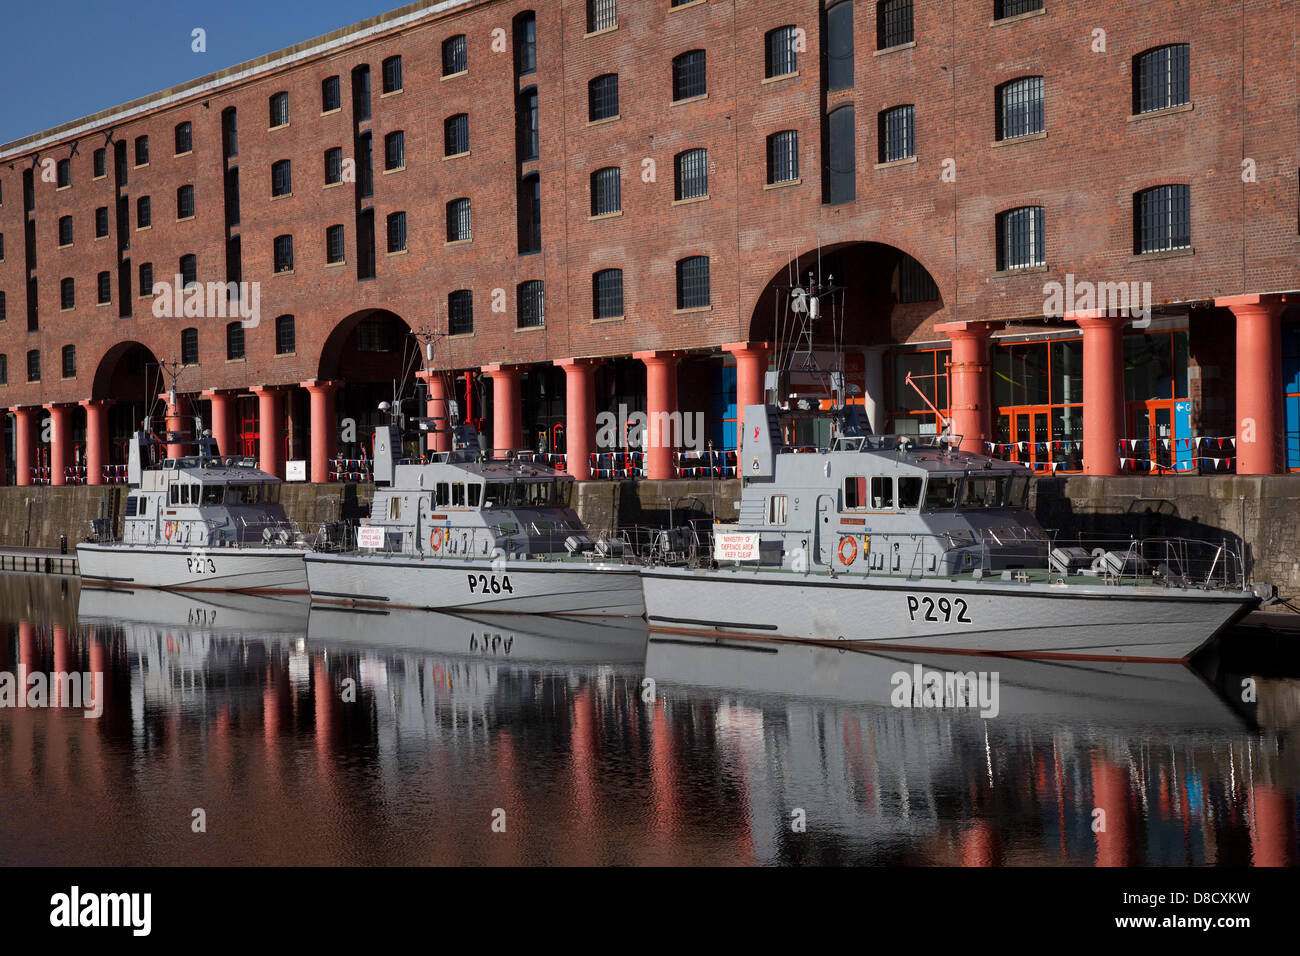 Royal Navy Ships in Albert Dock Liverpool, UK 24th May, 2013. HMS Pursuer (P273), HMS Charger (P292) and 'HMS Archer' all Archer-class patrol and training vessels of the British Royal Navy, based at the Faslane Patrol Boat Squadron (FPBS) at HMNB Clyde, at the 70th anniversary of the Battle of the Atlantic (BOA 70)  commemoration and events centred around Liverpool. The Battle of the Atlantic was the longest continuous military campaign in World War 2, at its height from mid-1940 through to the end of 1943. Stock Photo